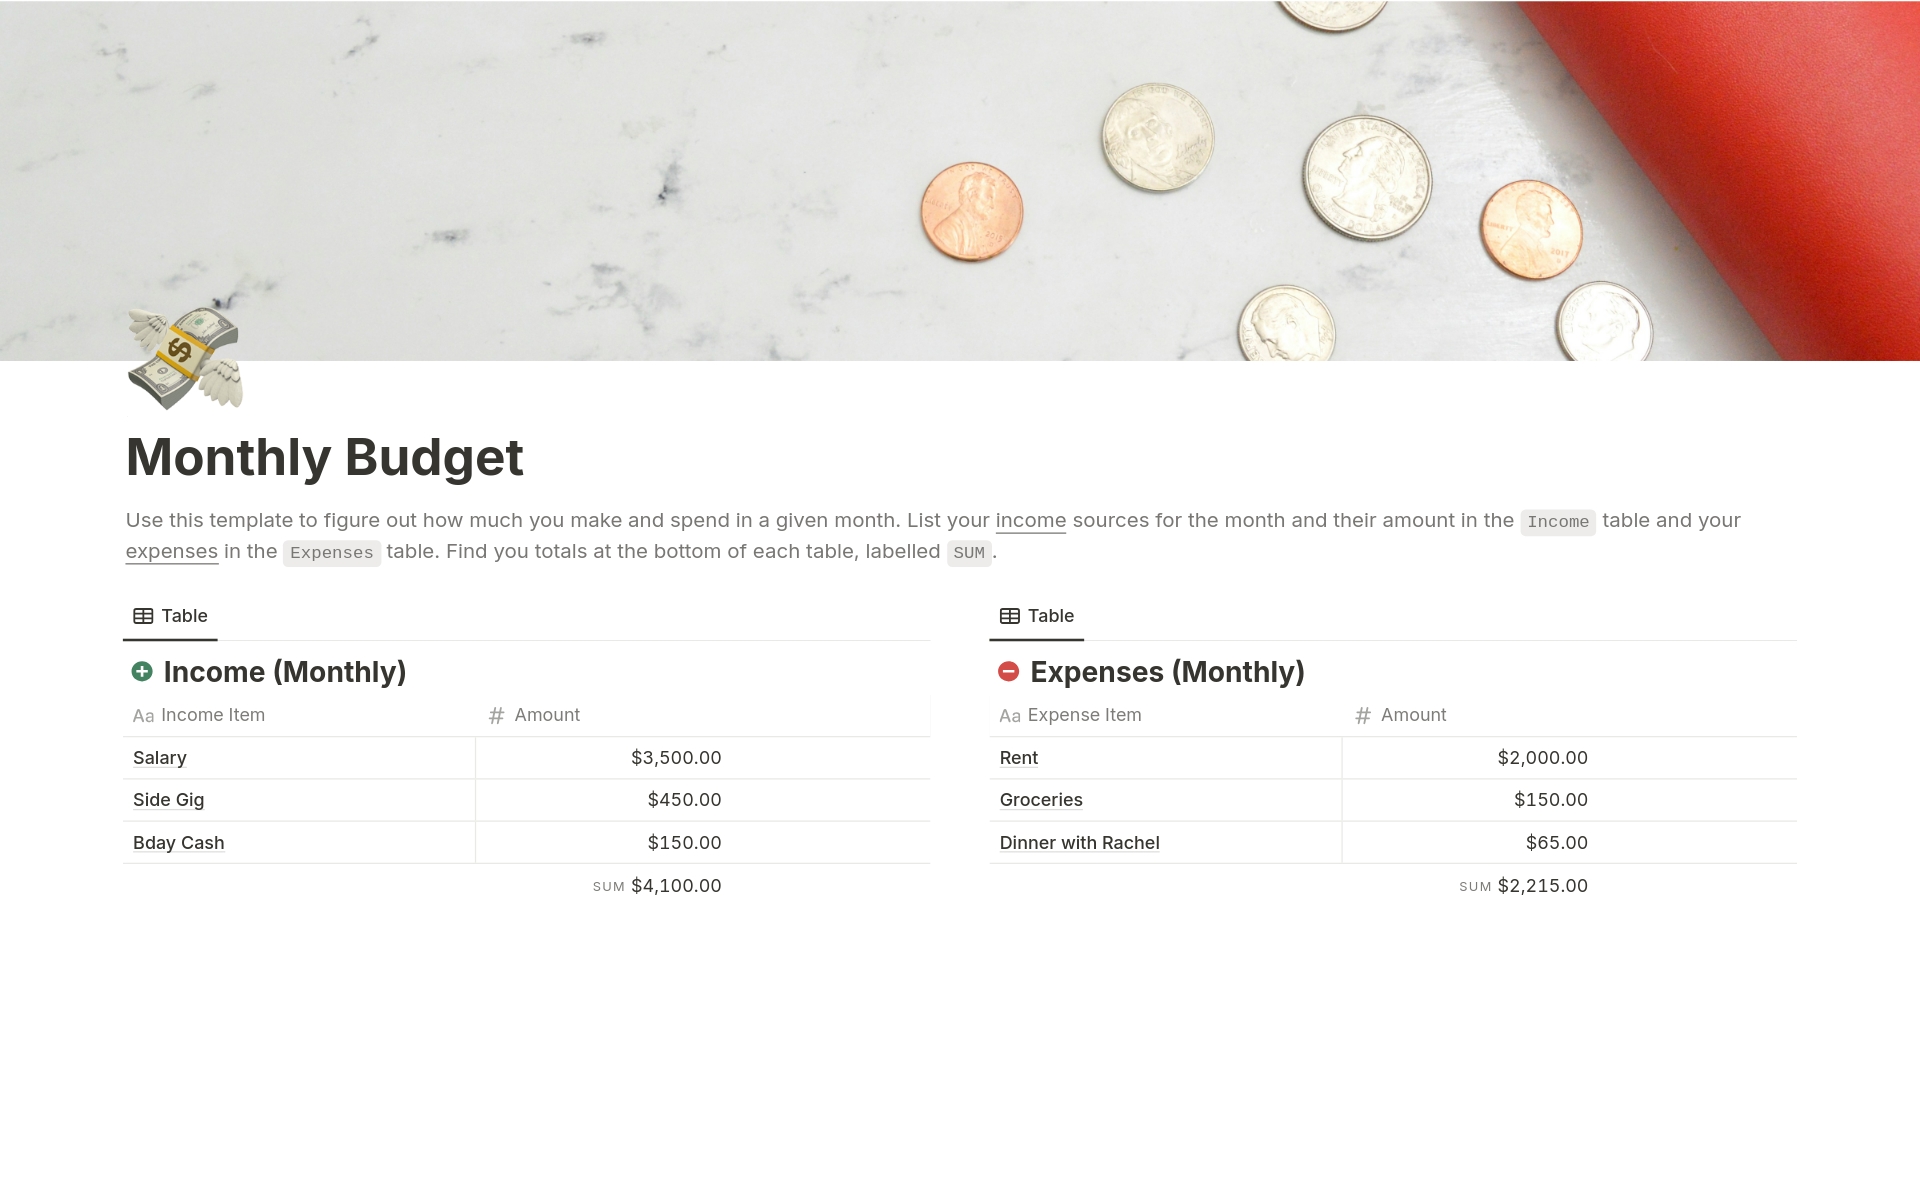 Discover your monthly financial flow with this intuitive budgeting template. Simply list all your income sources and their amounts in the Income table, and track your spending in the Expenses table. Easily find the total sum at the bottom of each table, giving you a snapshot.